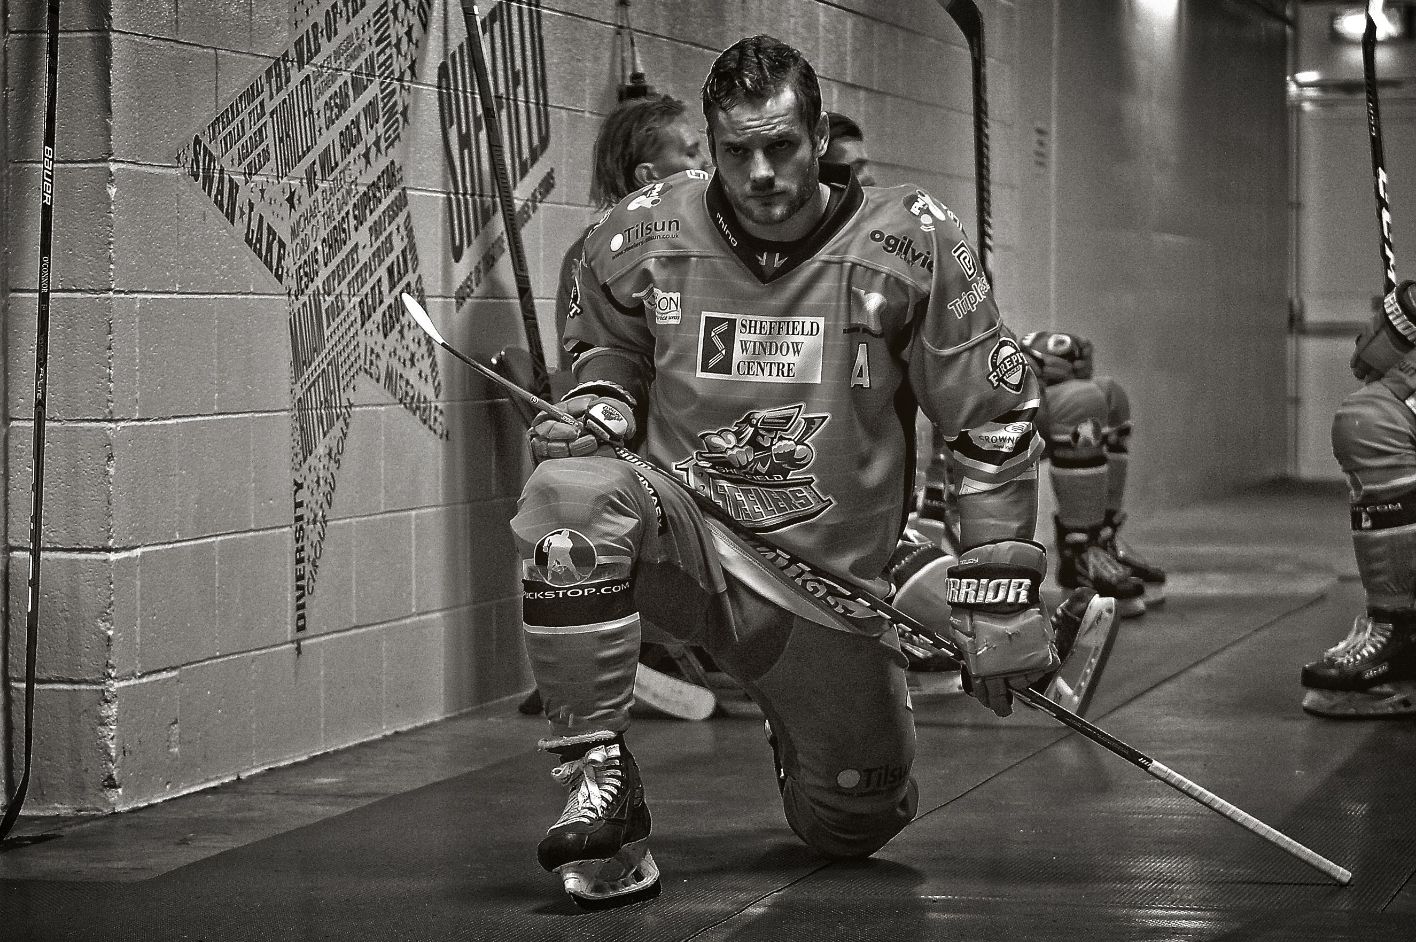 Ice hockey player on one knee and looking at the camera.